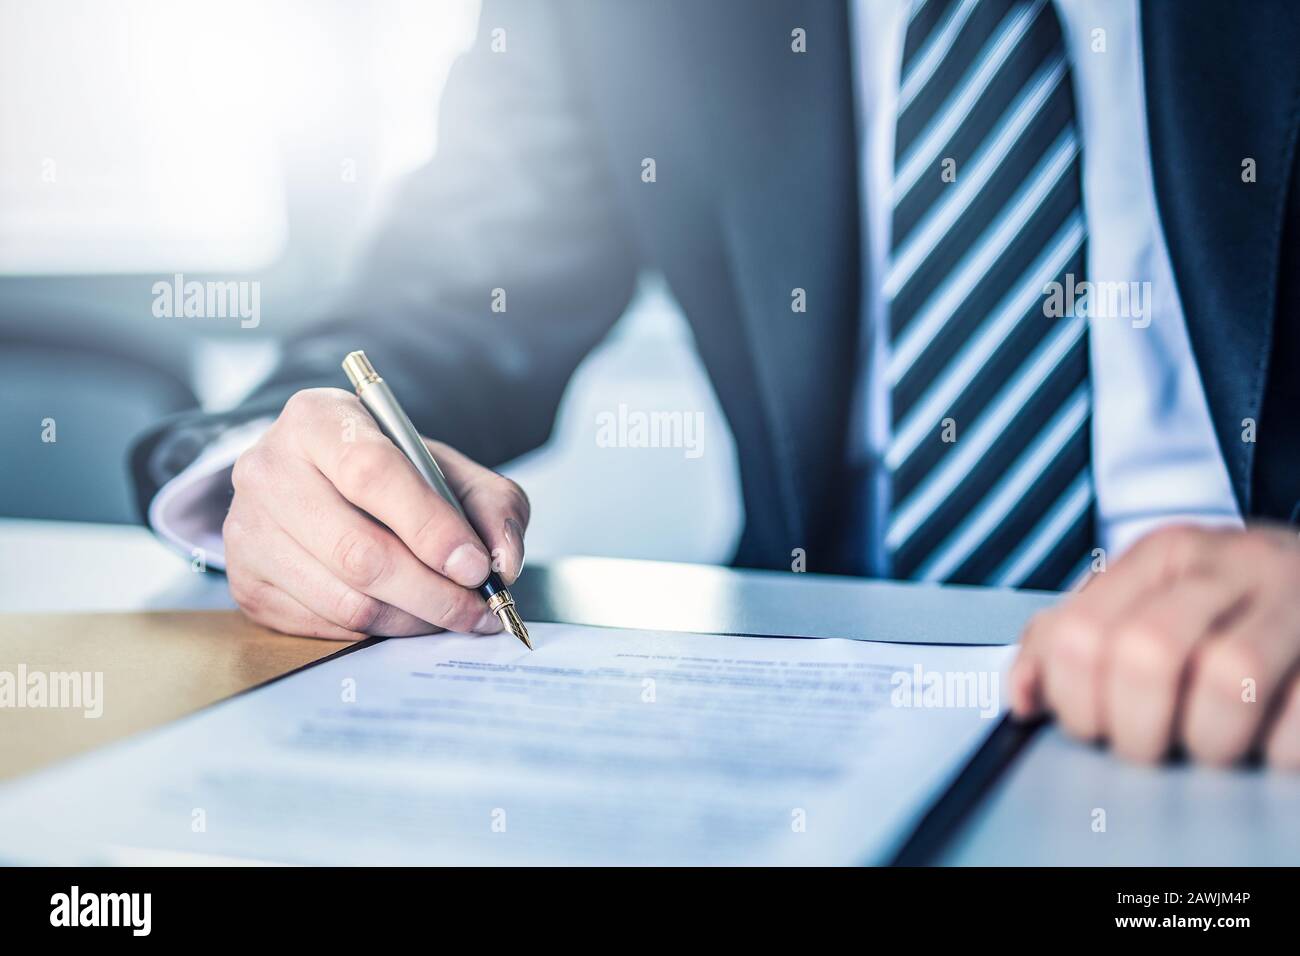 Business man signing contract document on office desk, making a deal. Stock Photo